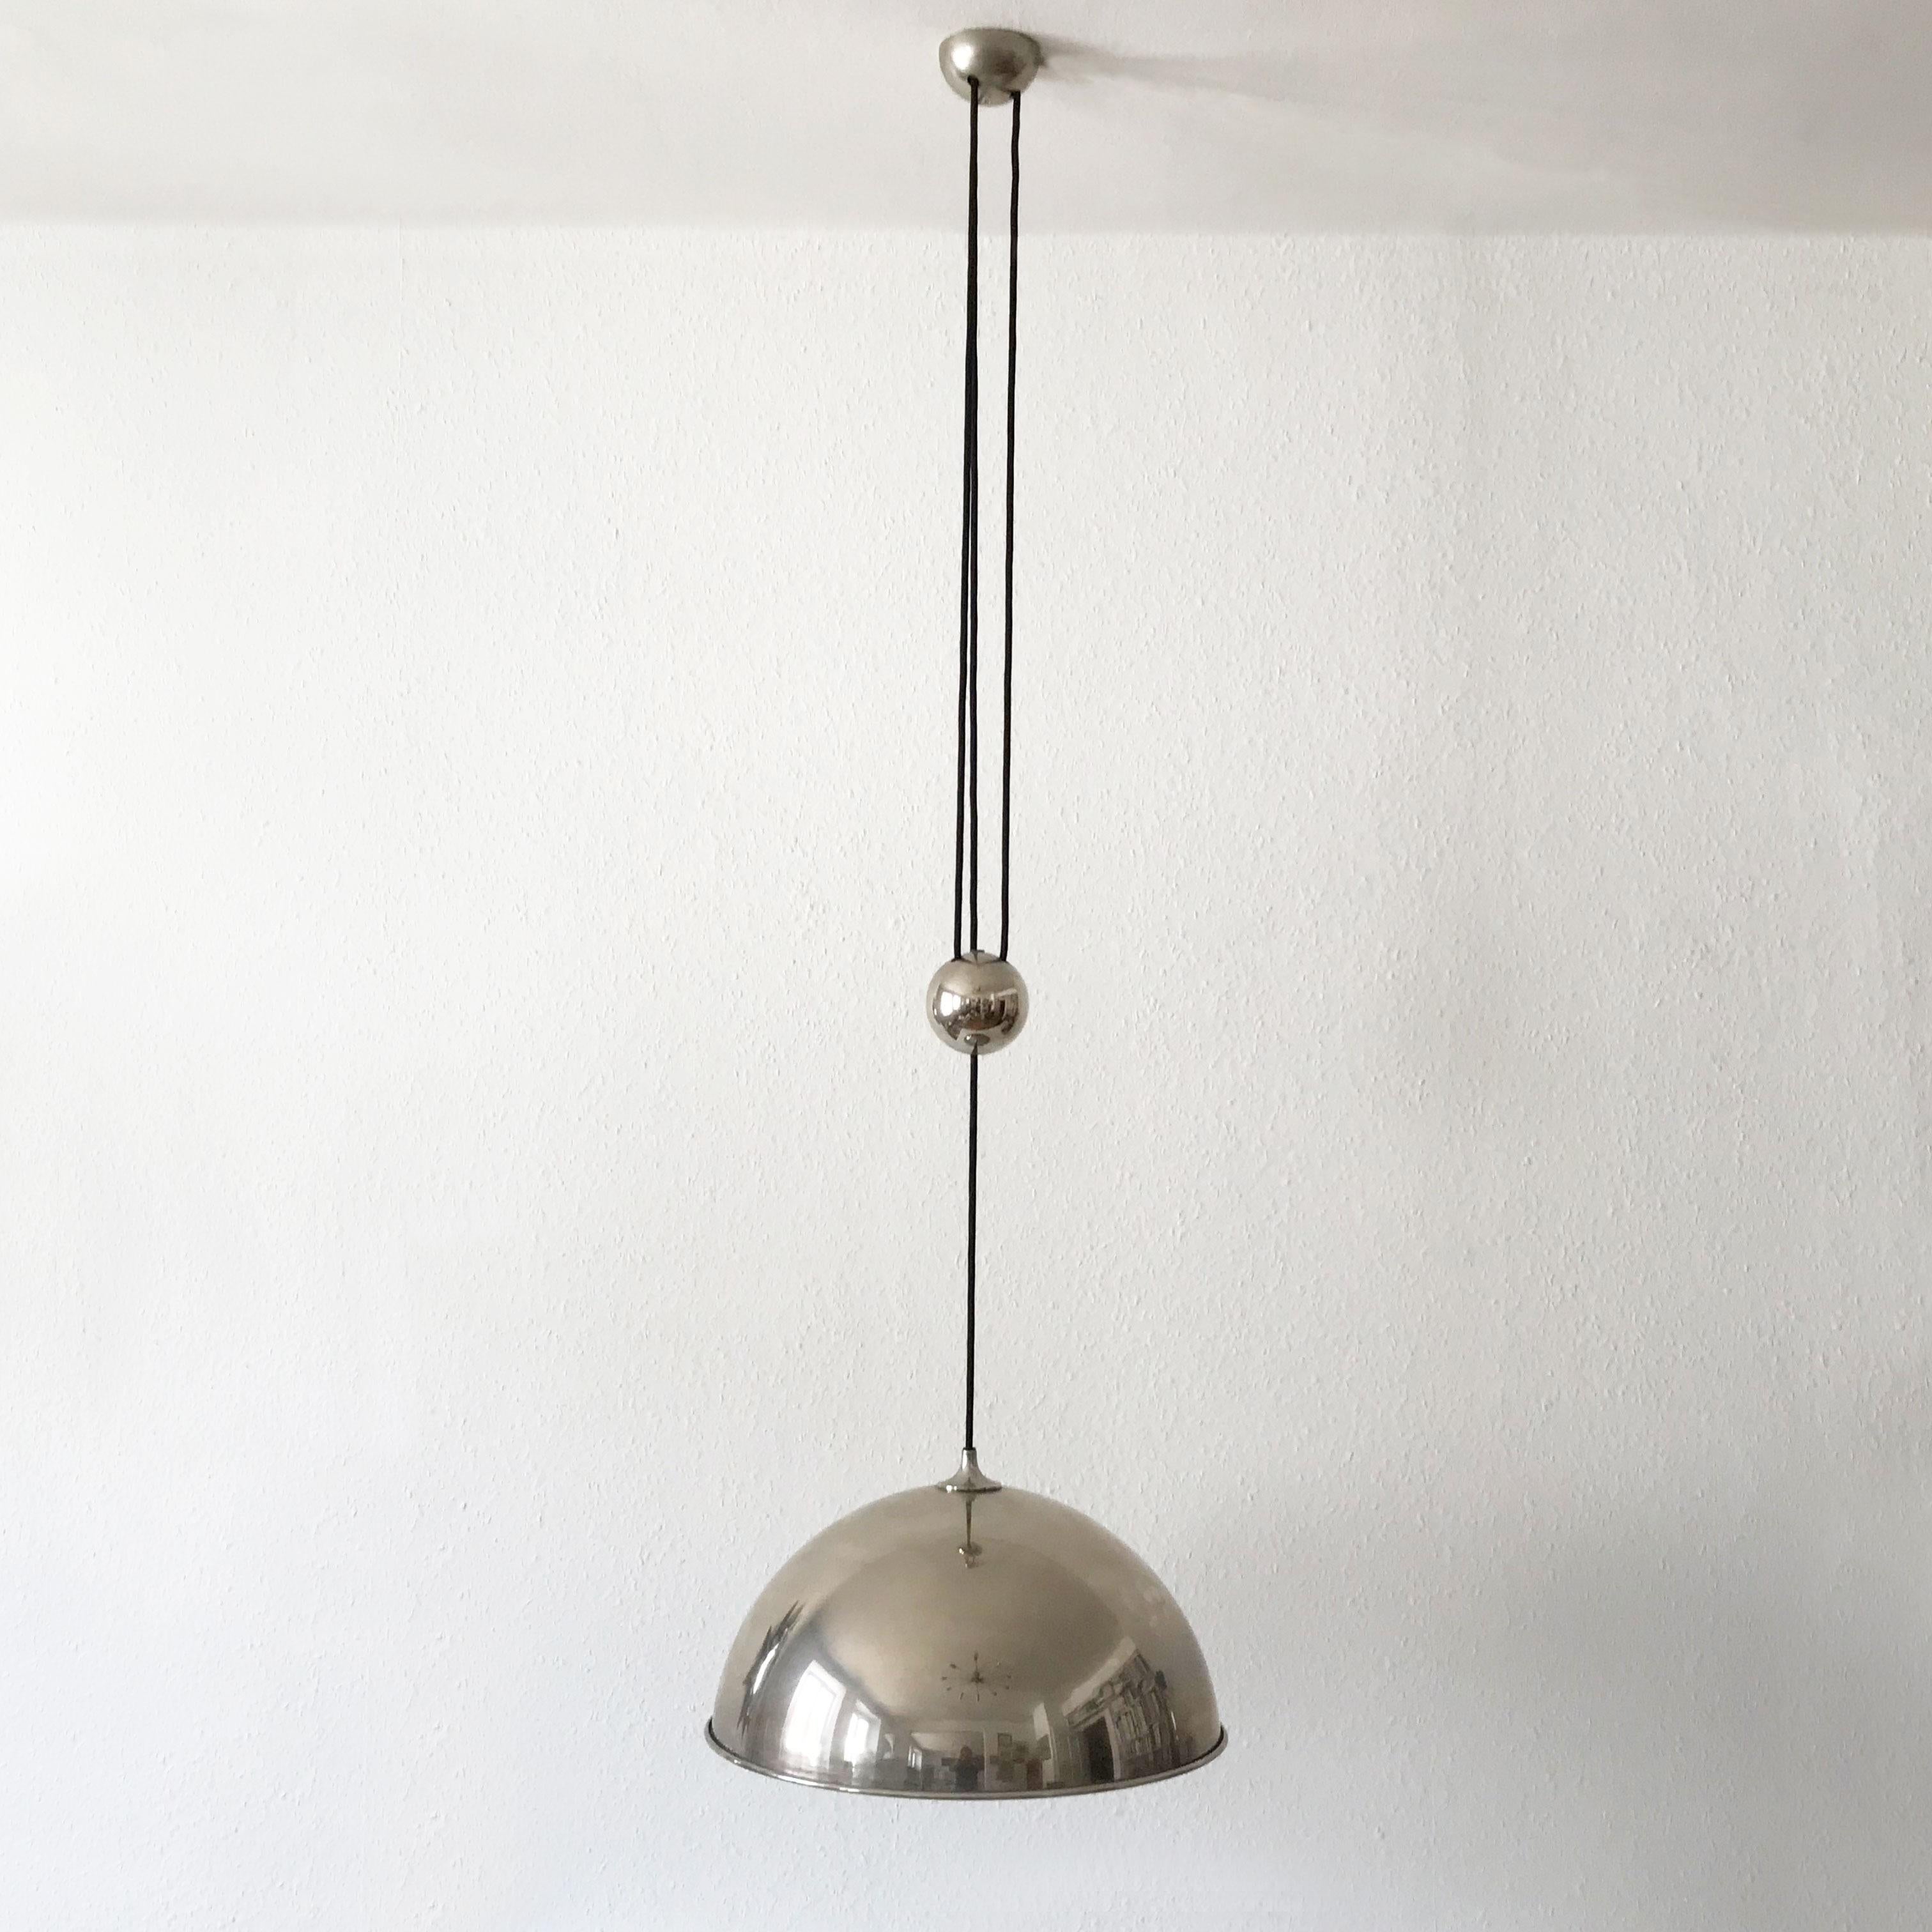 Elegant Mid-Century Modern counterweight pendant lamp by Florian Schulz, Germany, 1980s.

Executed in nickel-plated brass. The lamp needs 1 x E27 Edison screw fit bulb, is wired. It runs both on 110 / 230 Volt. 

Adjustable total height (the cord is